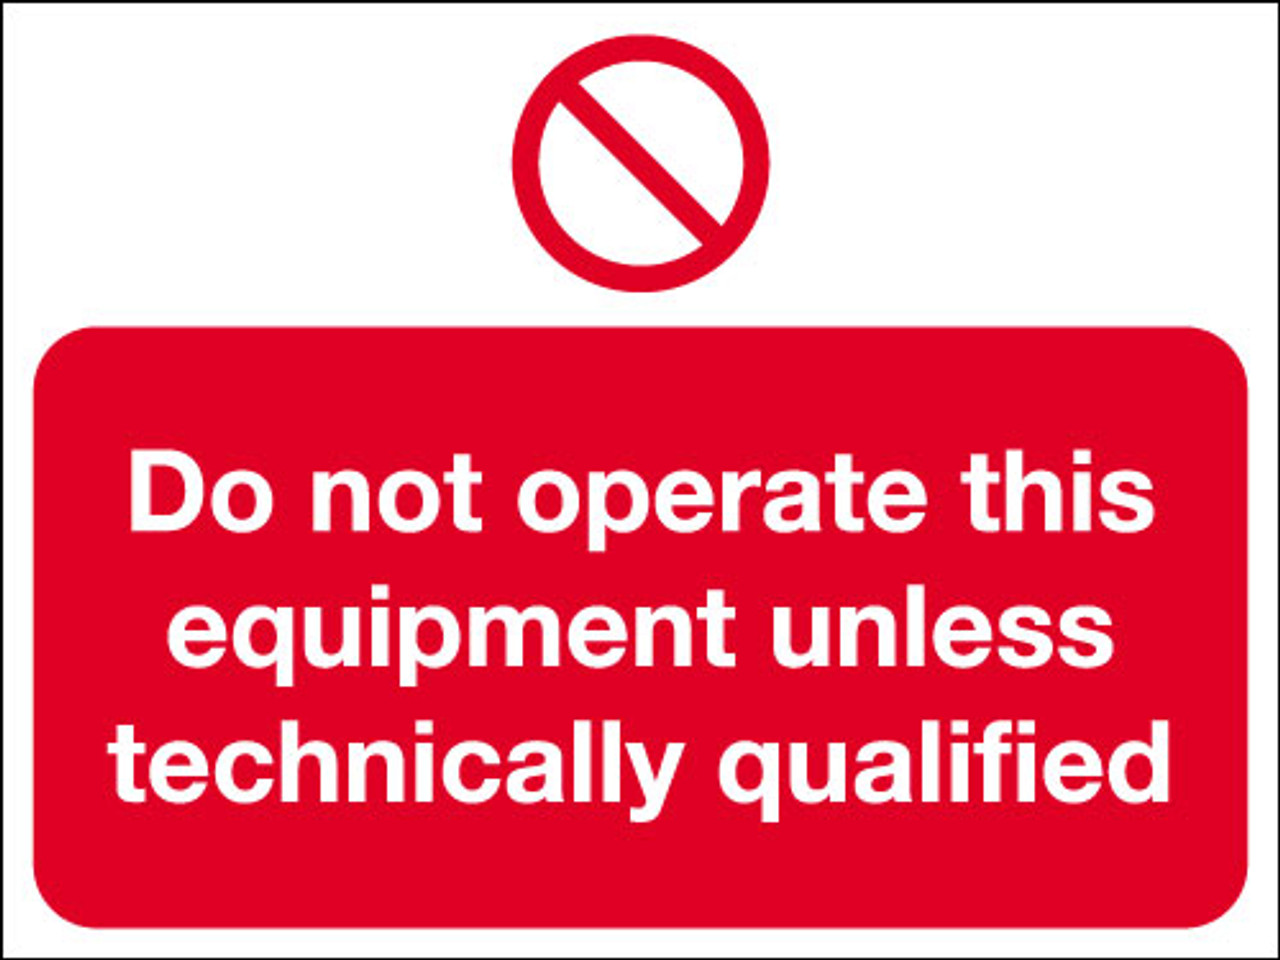 Do not operate this equipment unless technically qualified